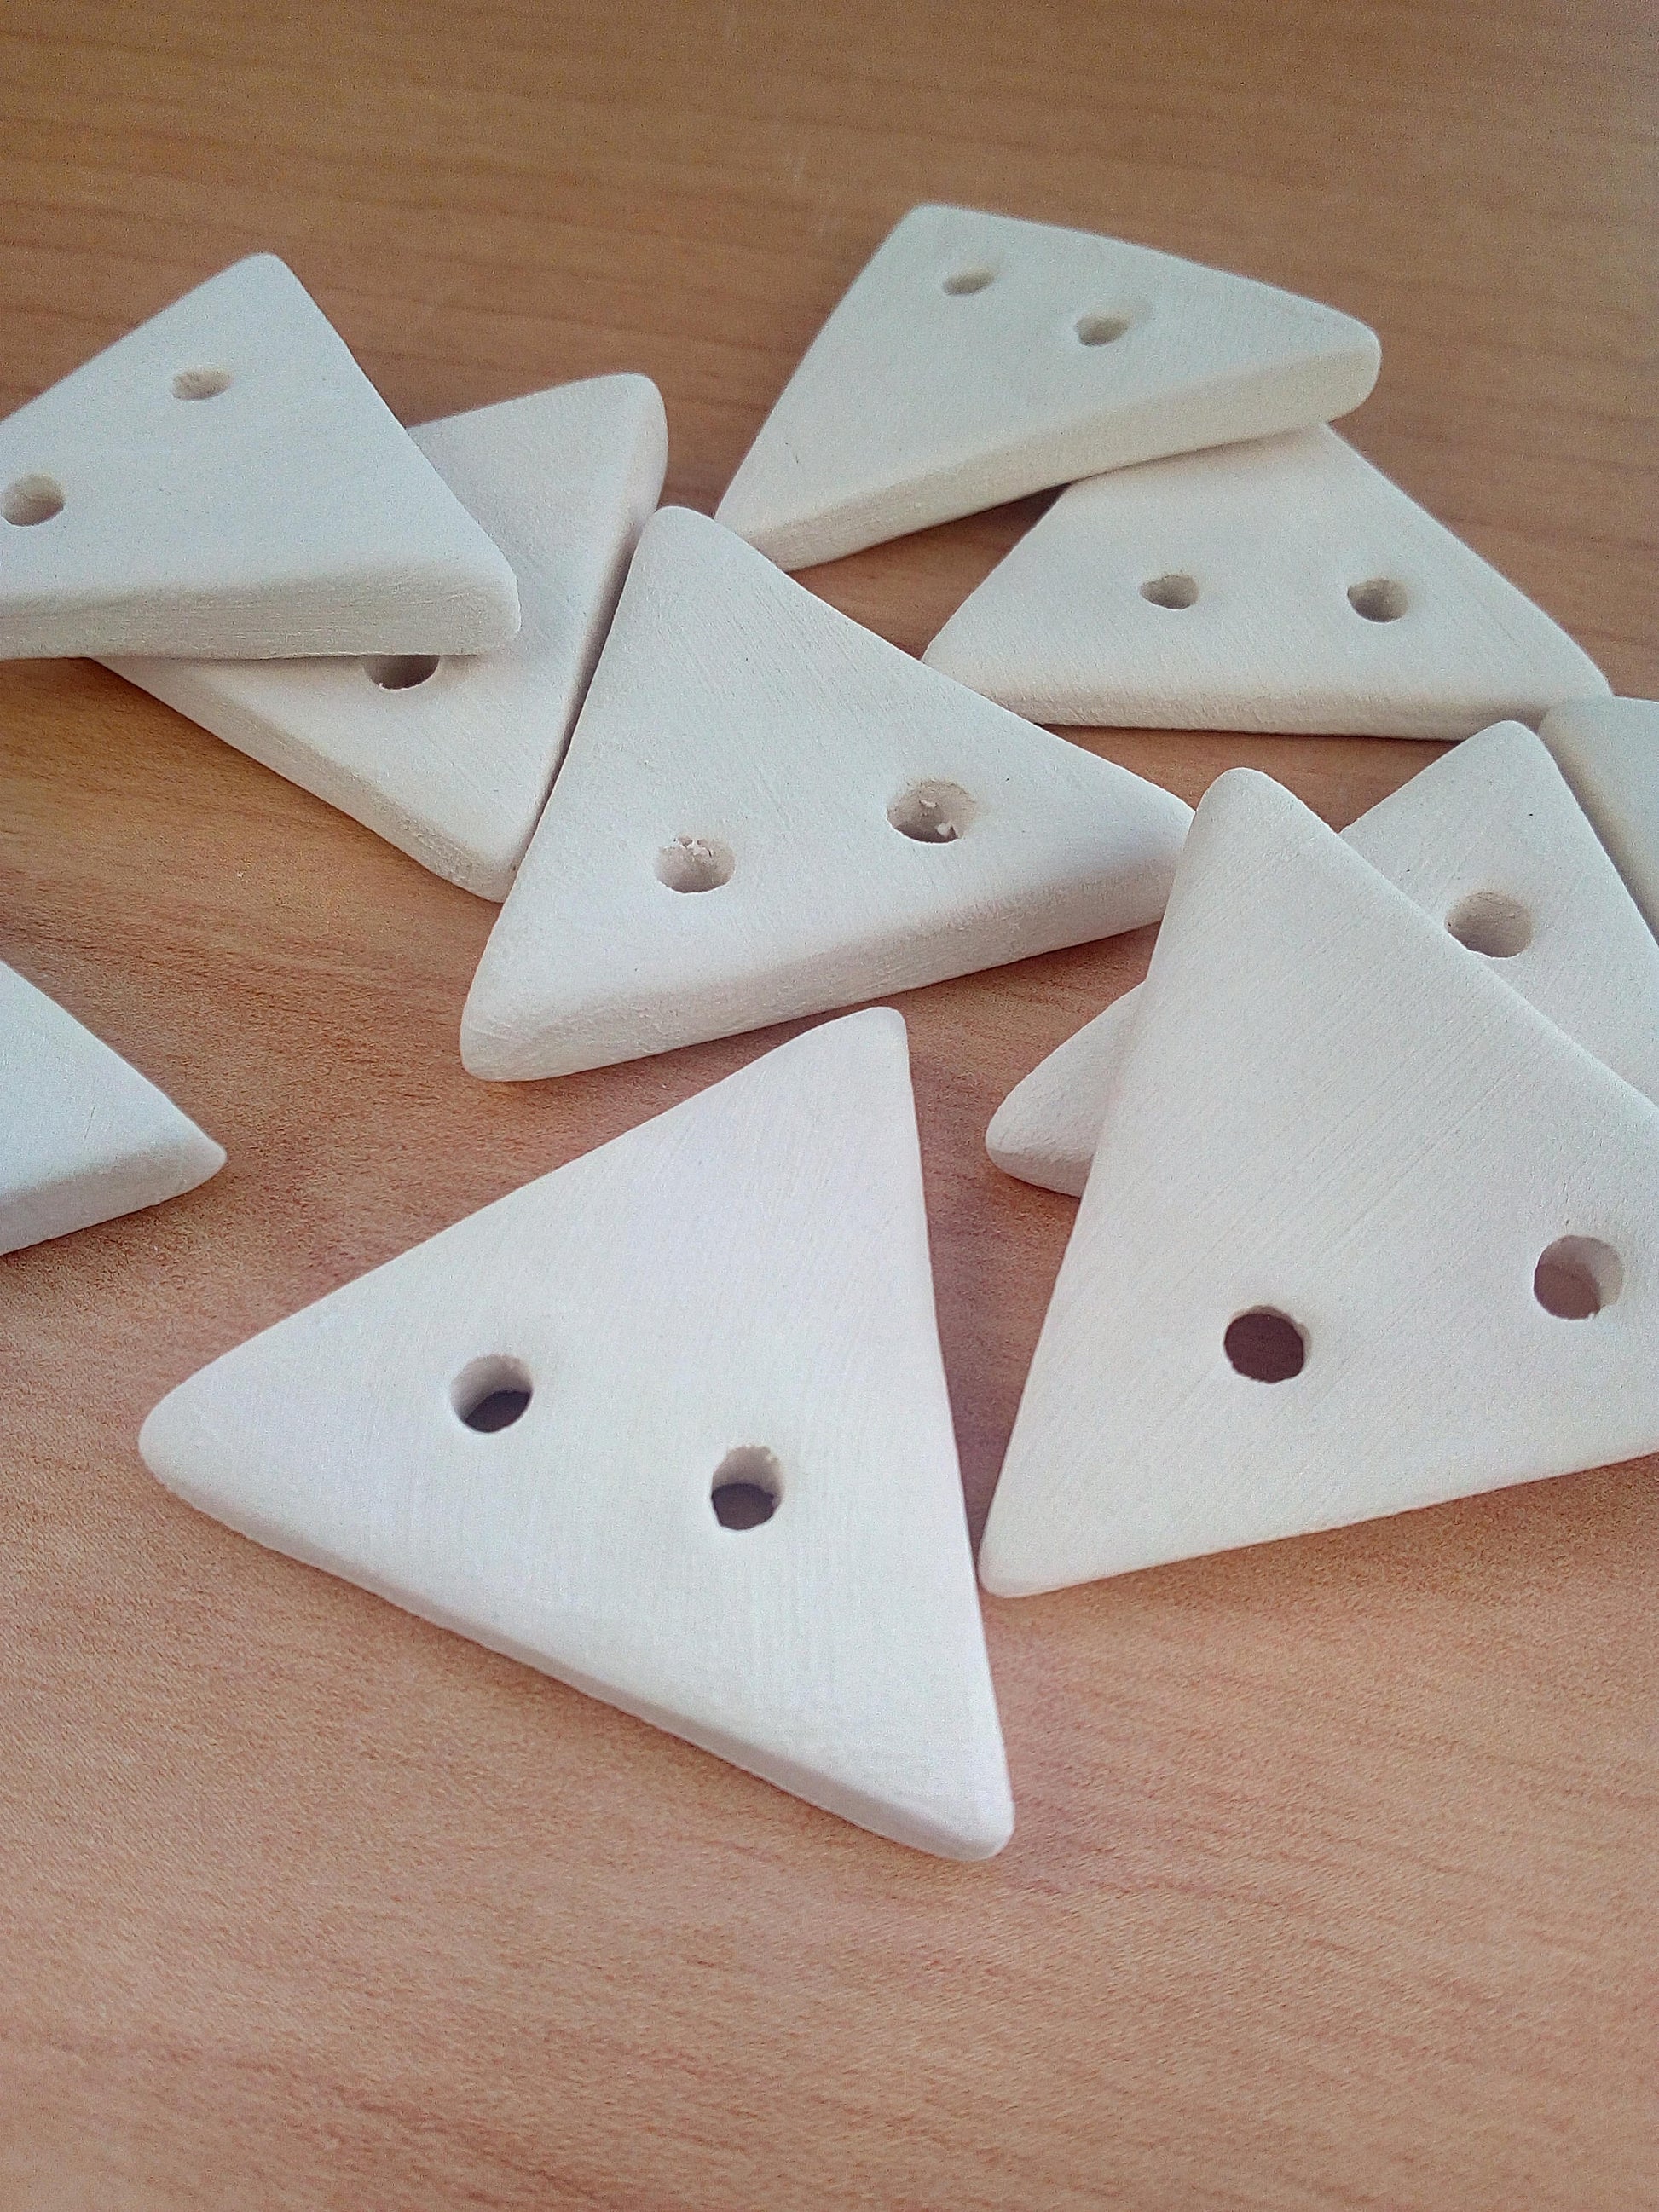 BLANK BUTTONS, TRIANGLE Sewing Buttons For Jewery Making, Set Of 10 Unpainted Ceramic Bisque Ready To Paint, Novelty Buttons, Flat Buttons - Ceramica Ana Rafael